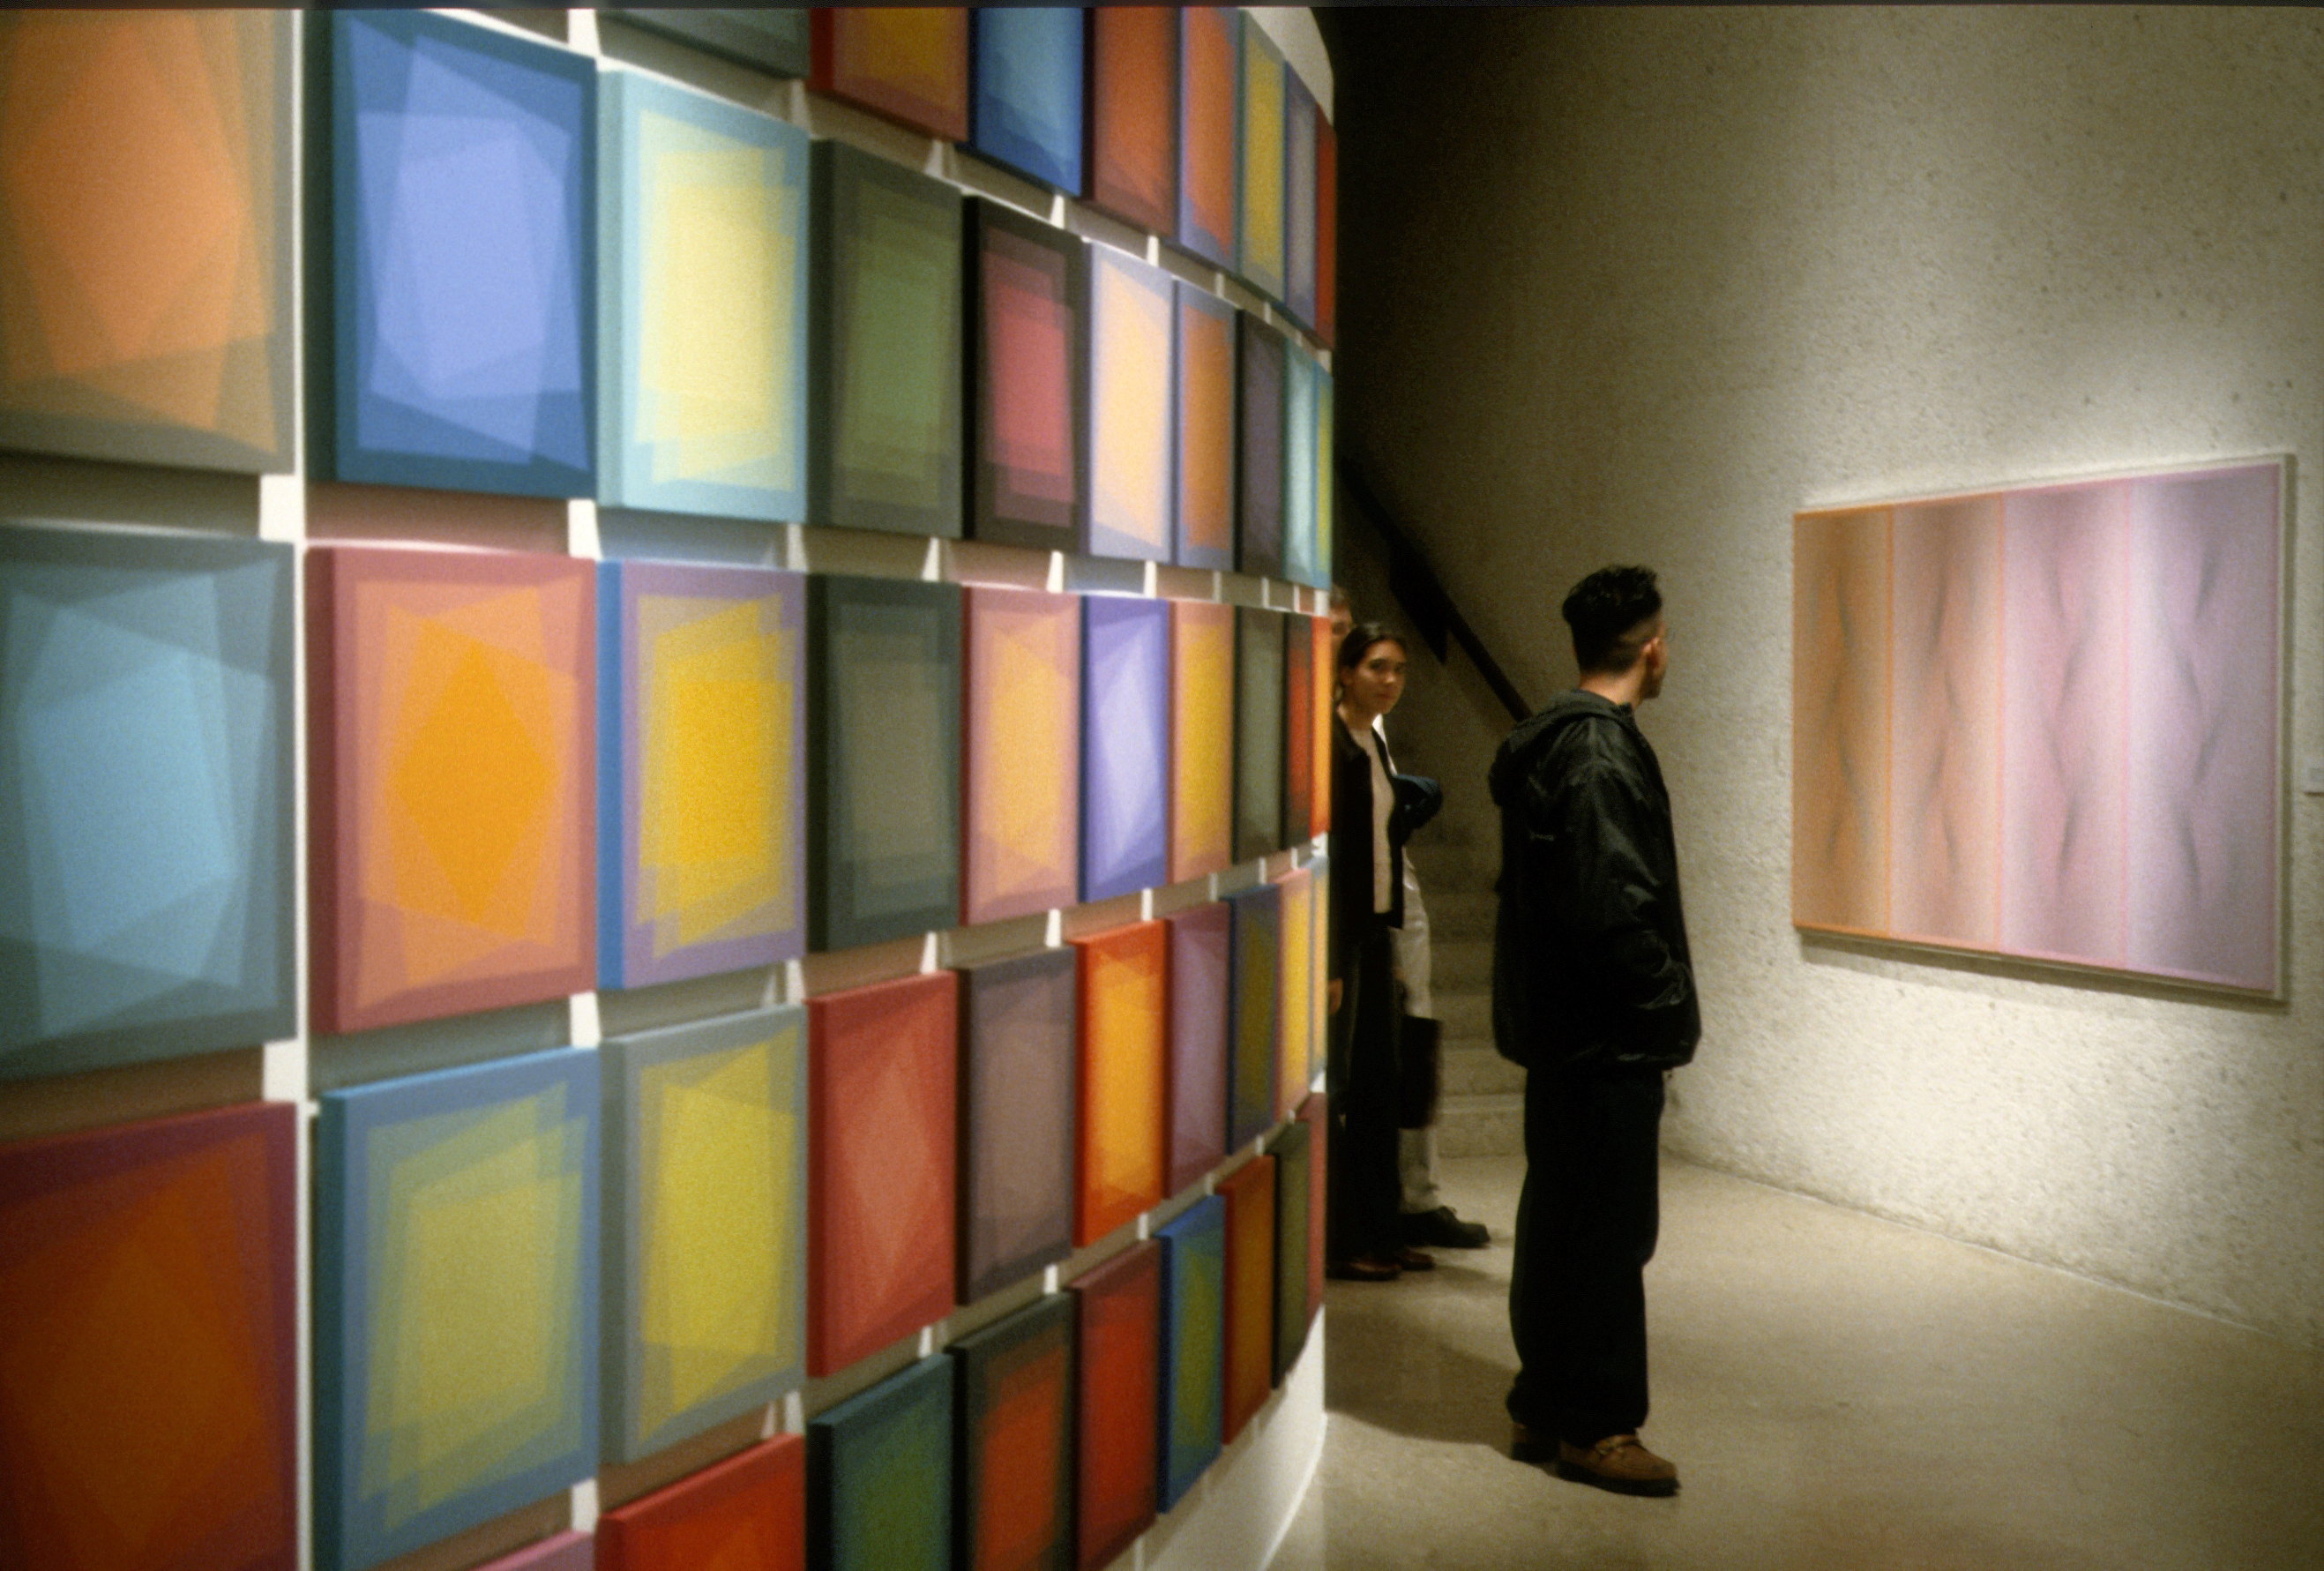 2004 exhibition entitled 'Julian Stanczak: Op Art Painting' at the South Texas Institute for the Arts